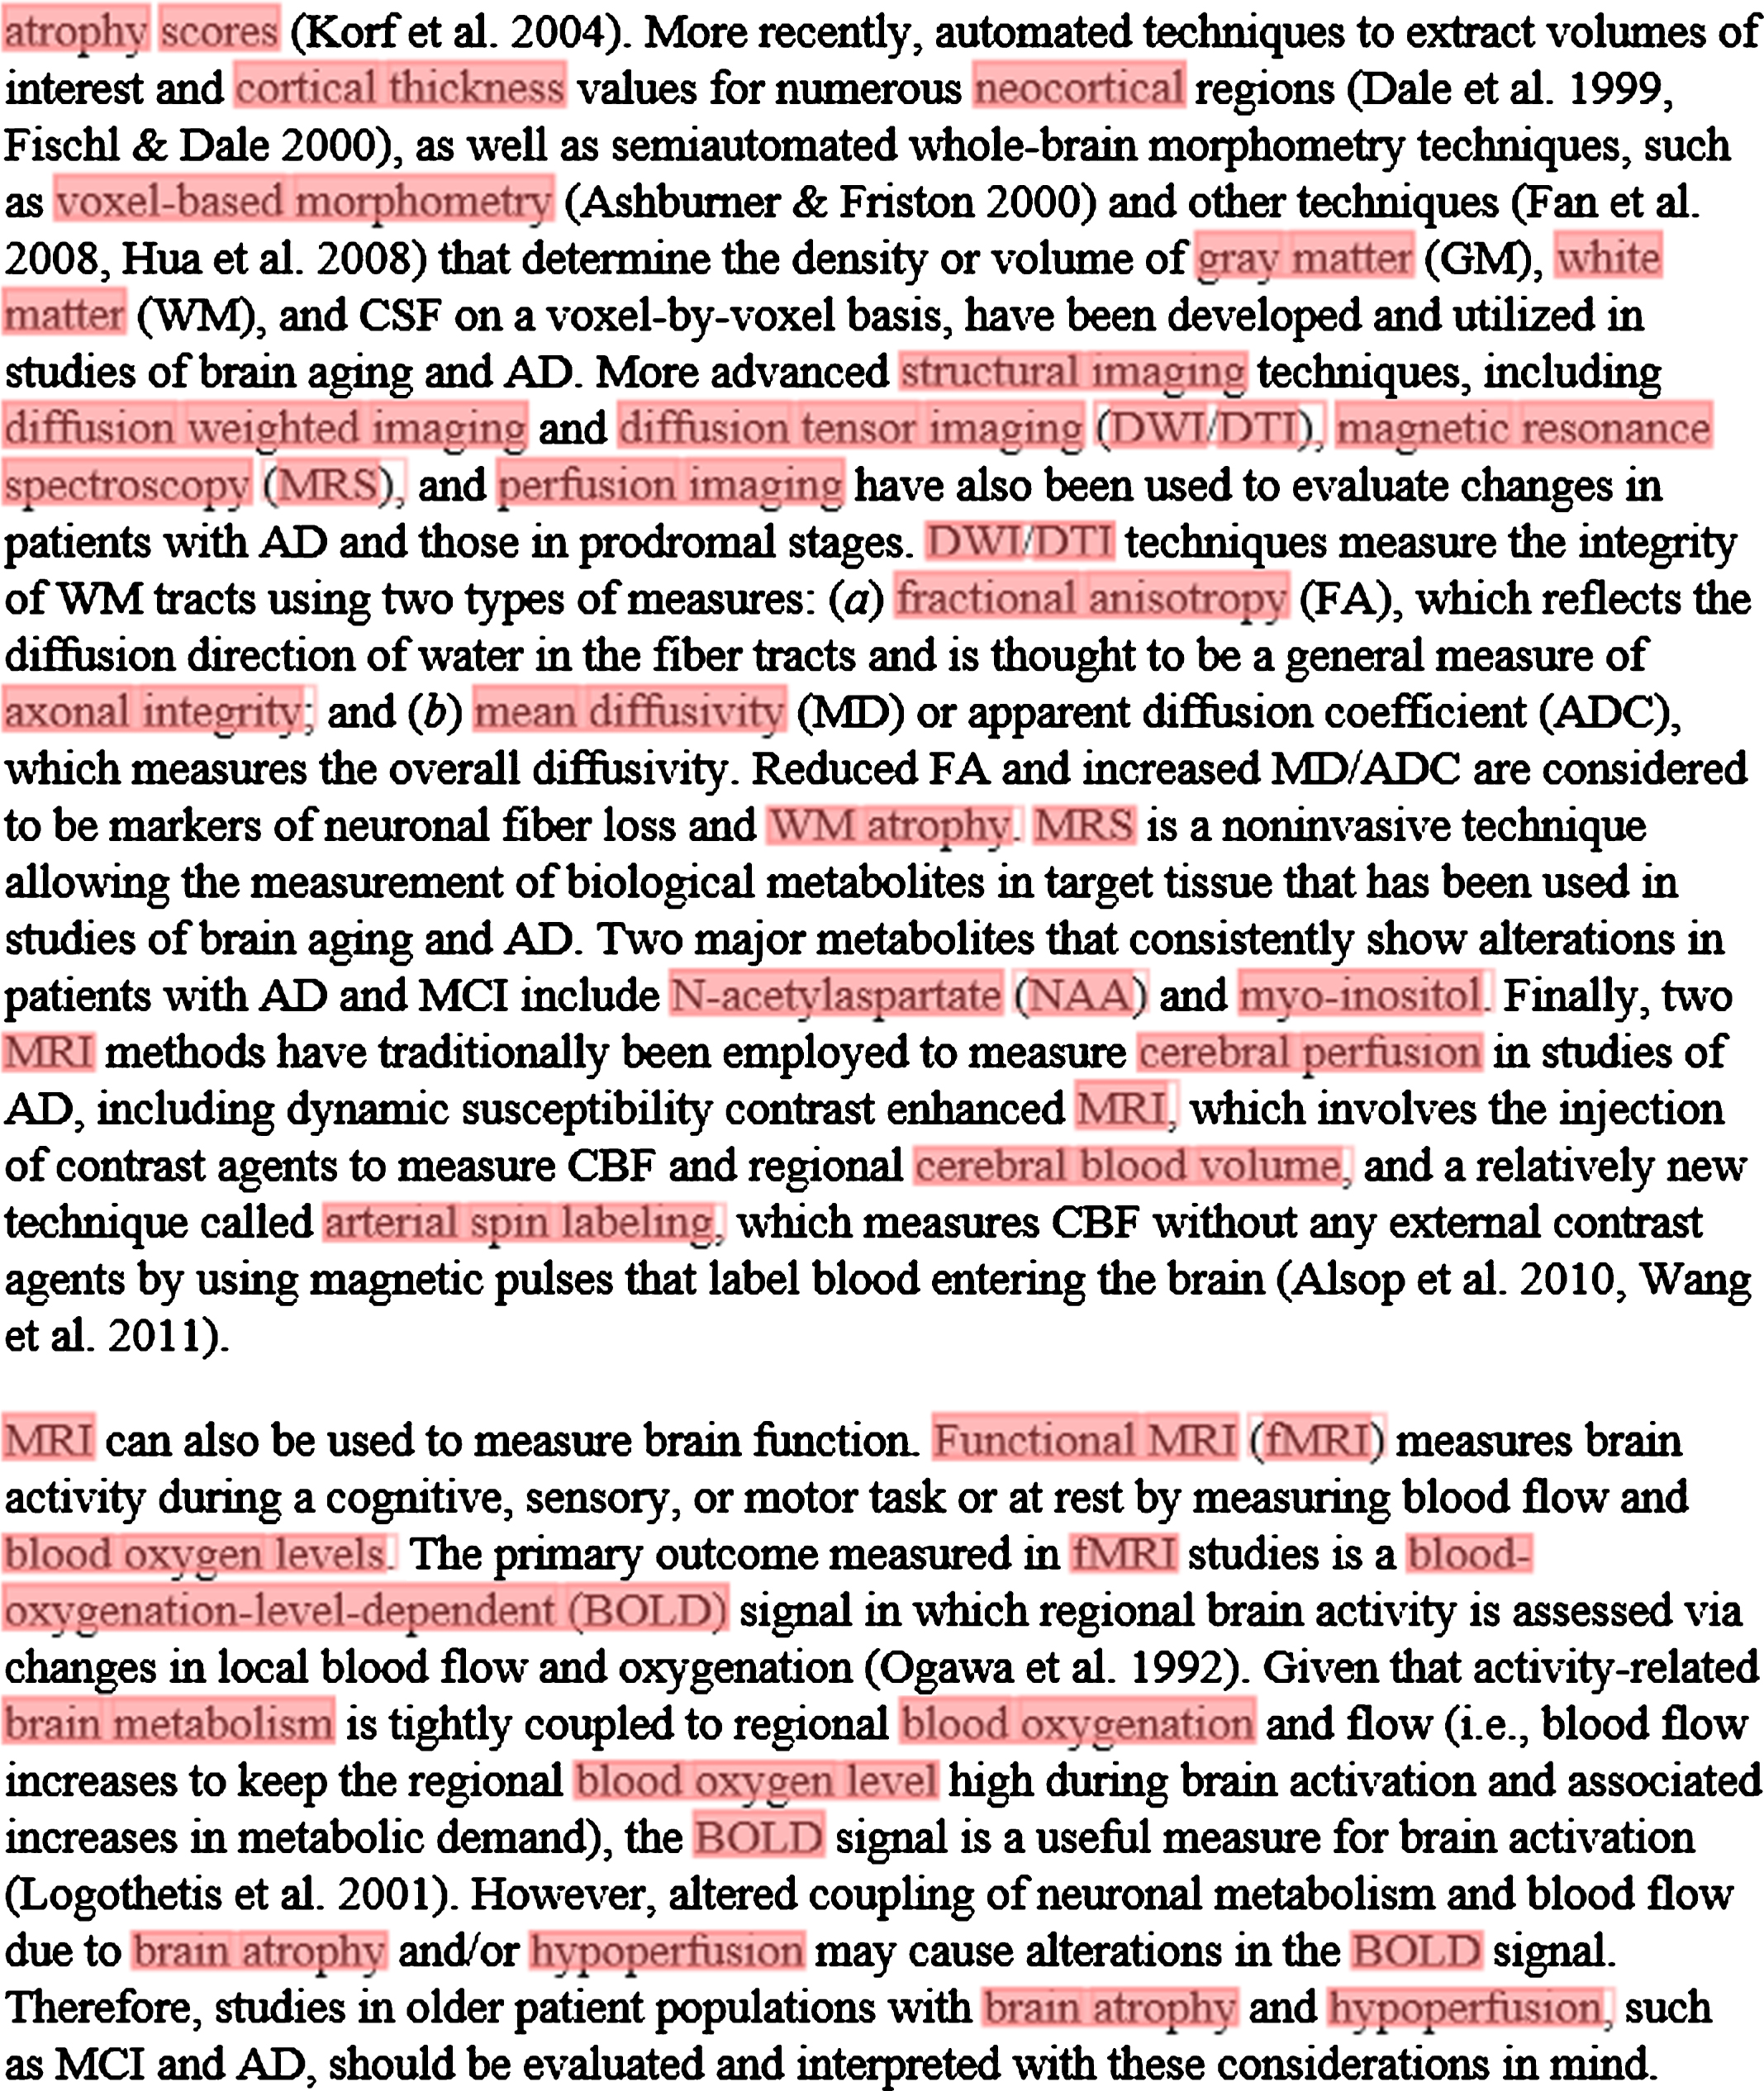 Annotation of a section of a full-text article using the NIFT terminology. The ProMiner tagger was used to identify NIFT terms in full text; matching terms are marked up in red.